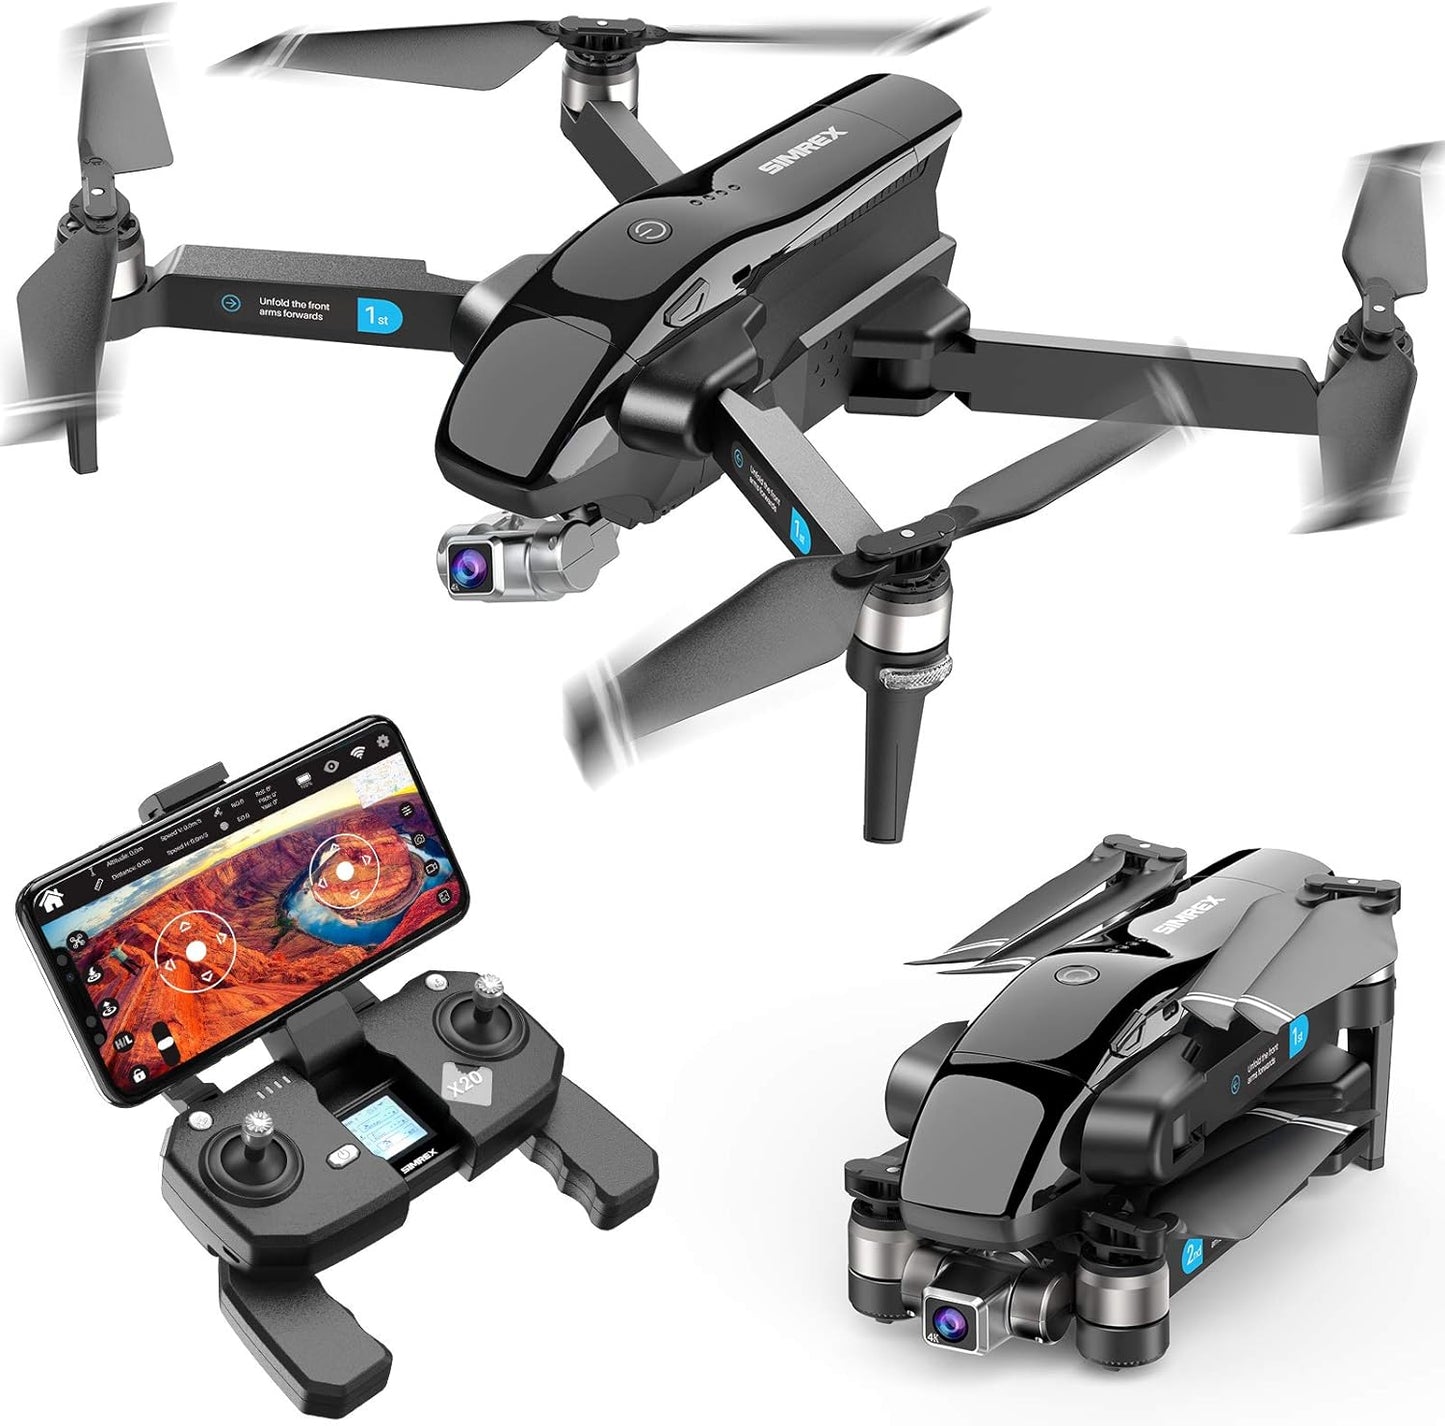 SIMREX X20 Drones with Camera 4K Professional Record Video Drone for Kids or Adults Provides 30 Minutes of Flight Time Automatic Return GPS Fixed Point or Surround Flight remote app controlled drones